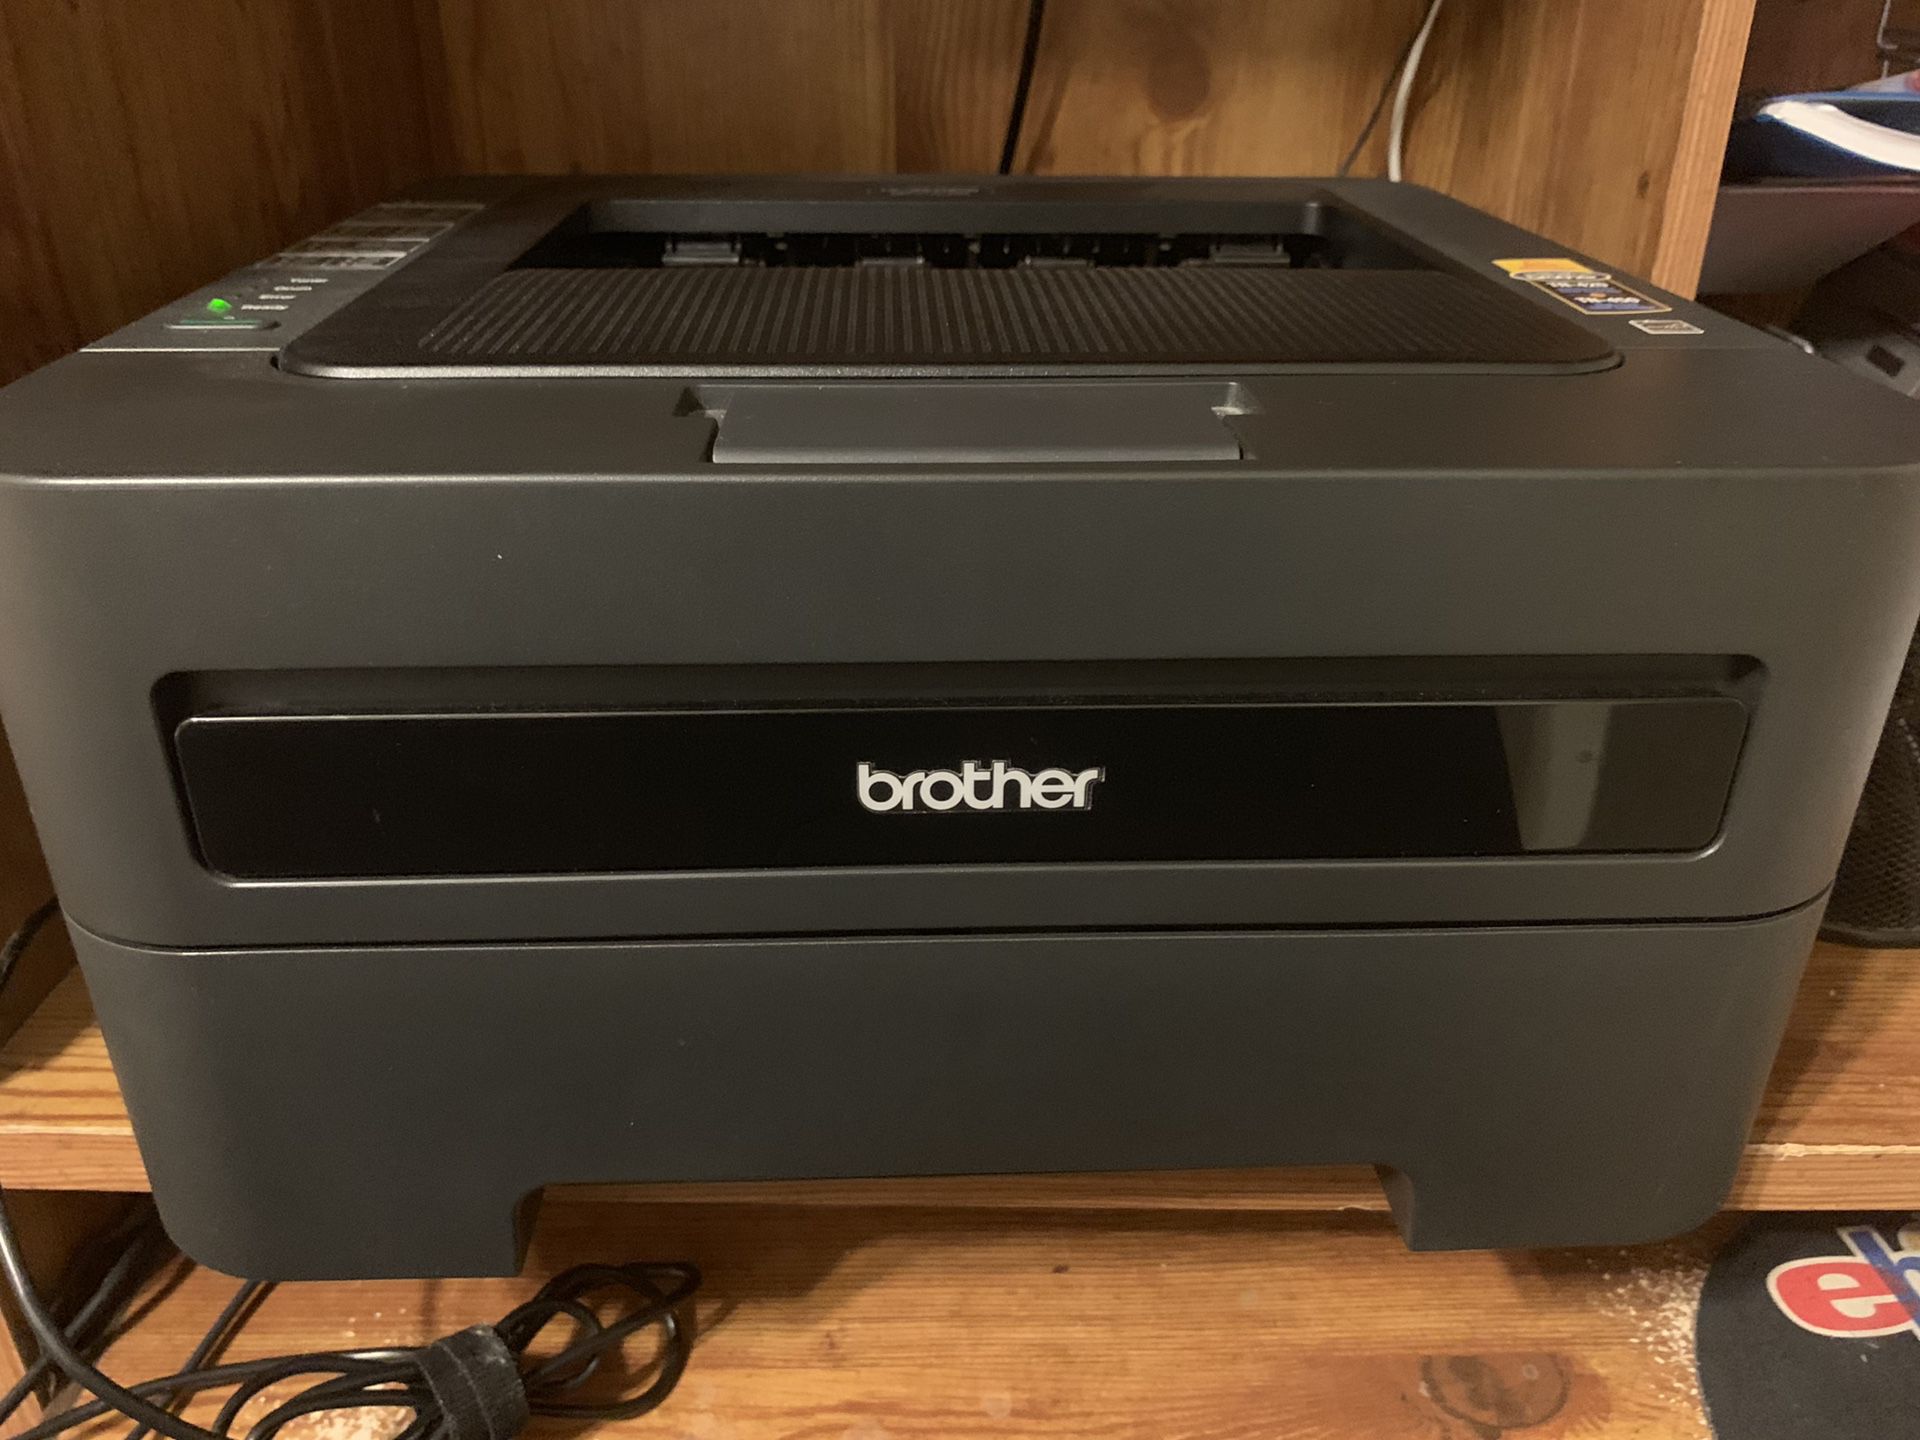 Brother printer works great